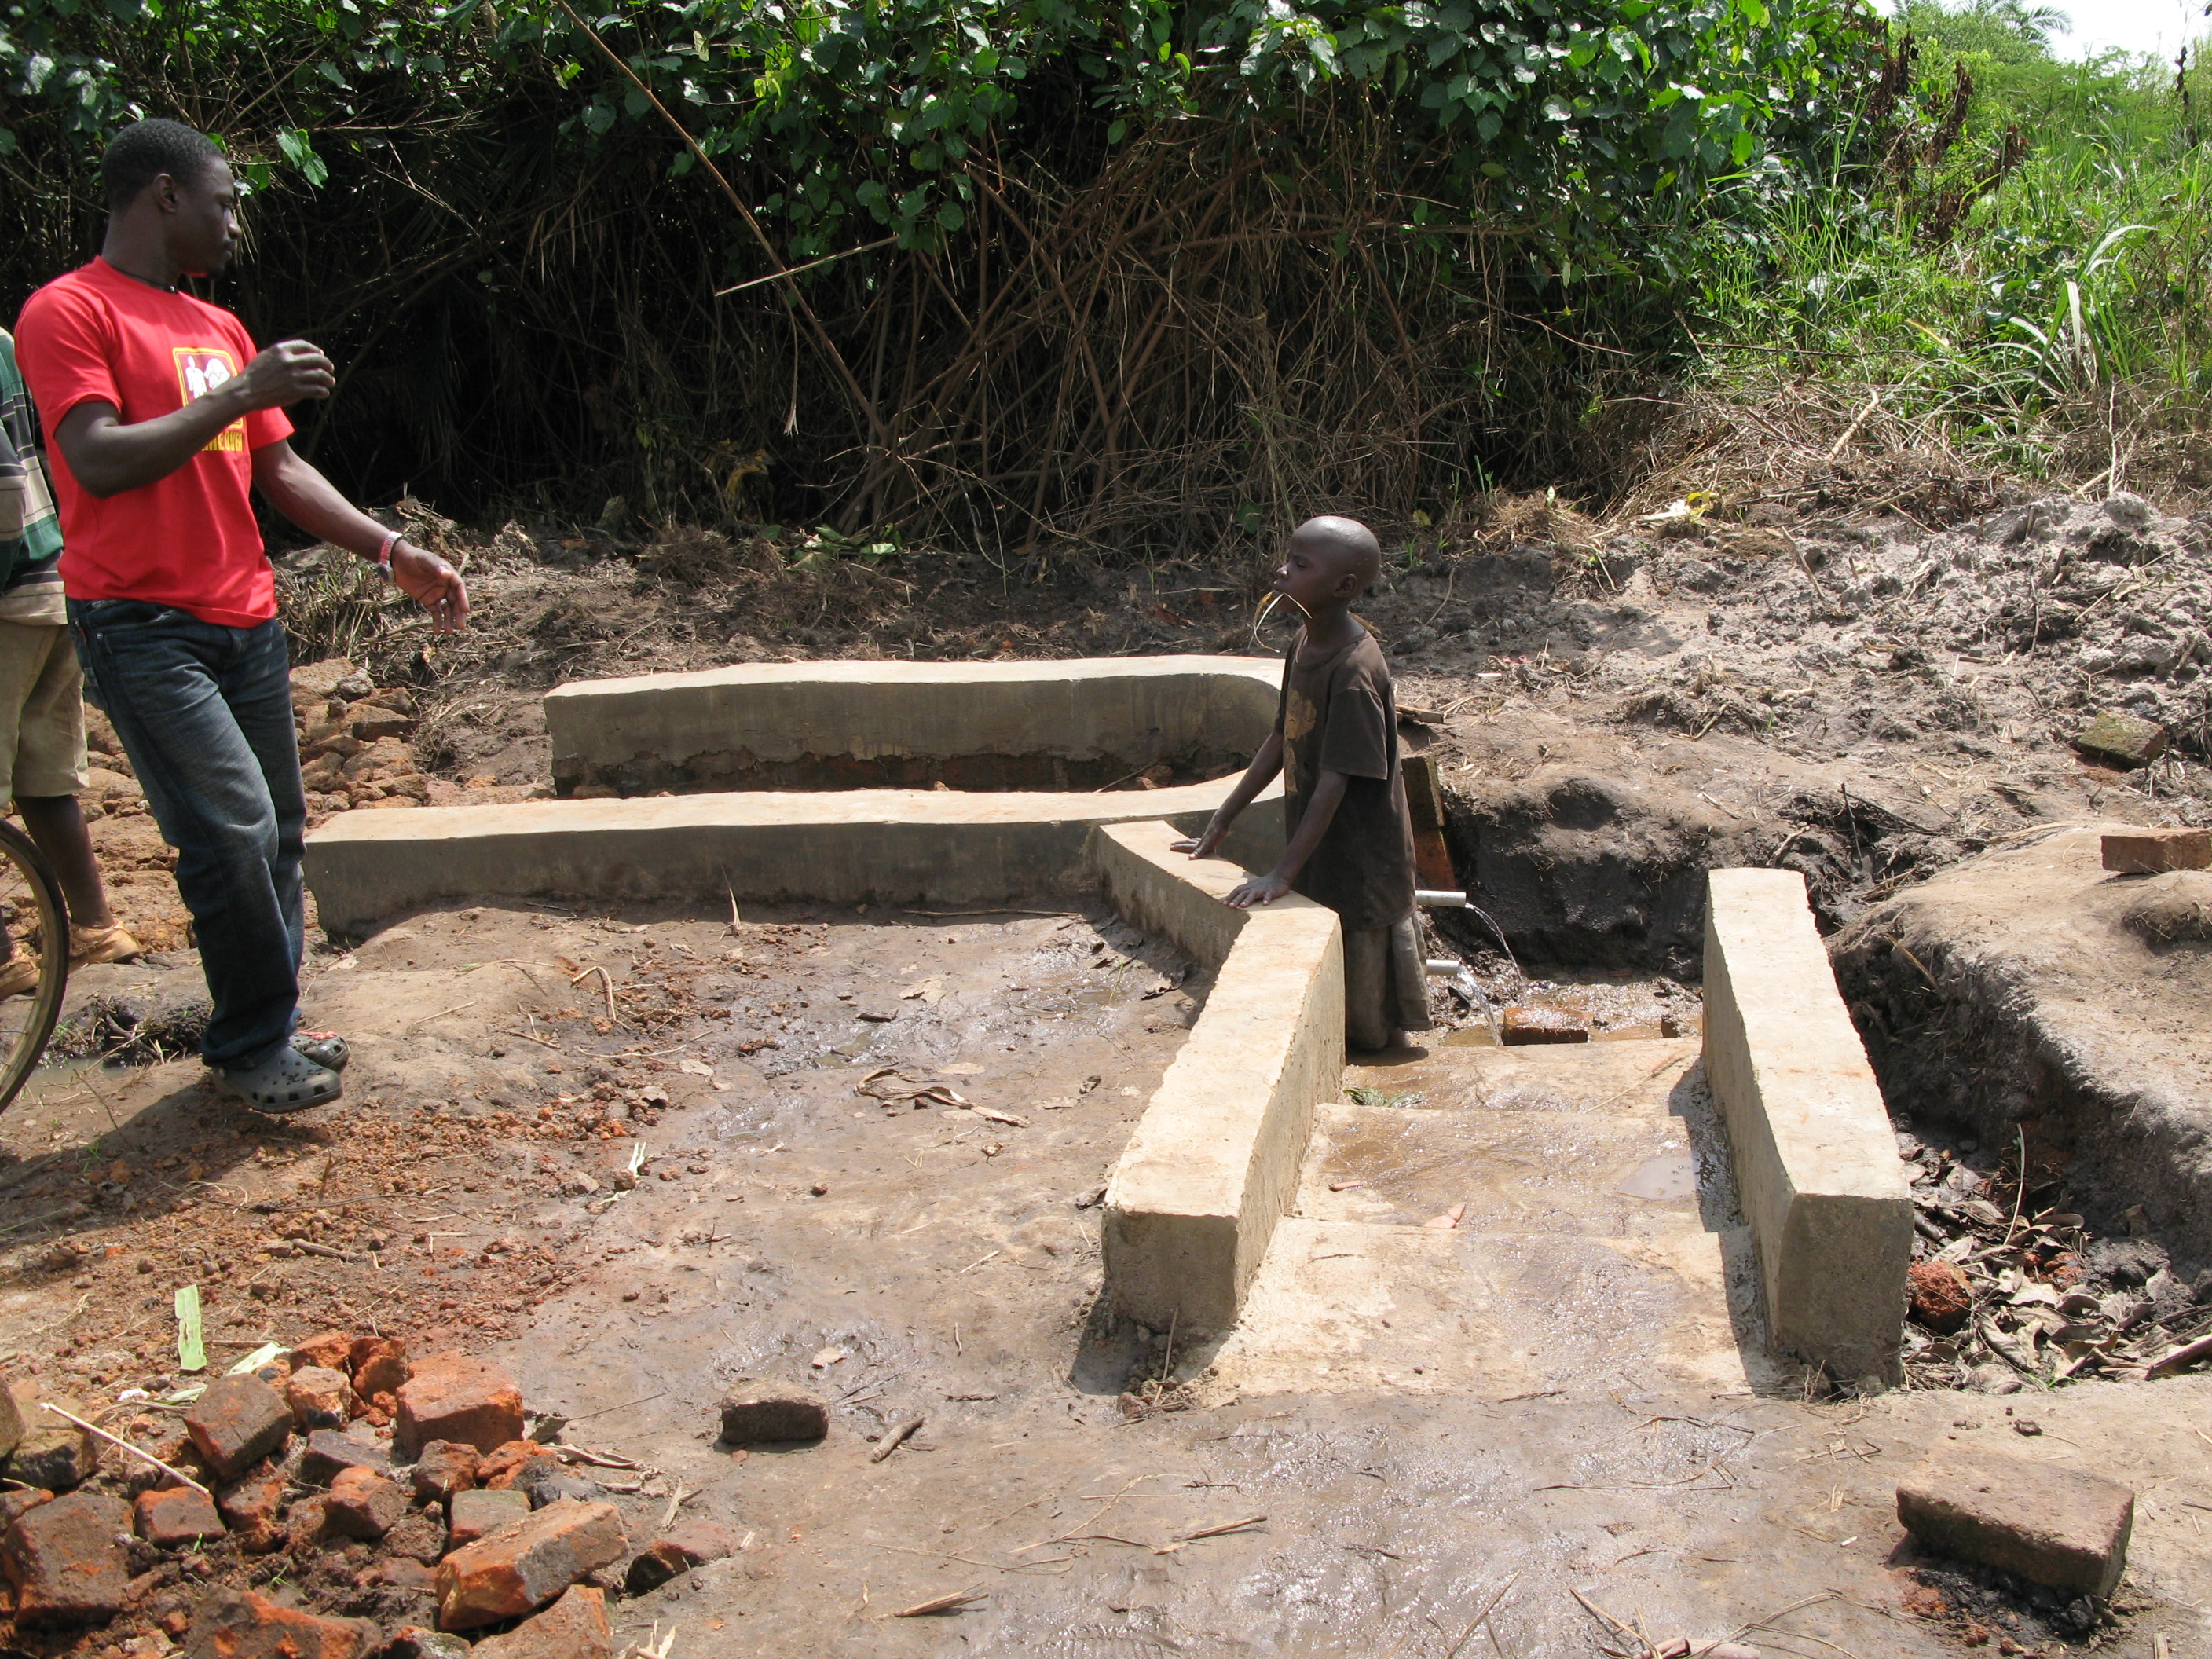 A man and a boy standing at a well.